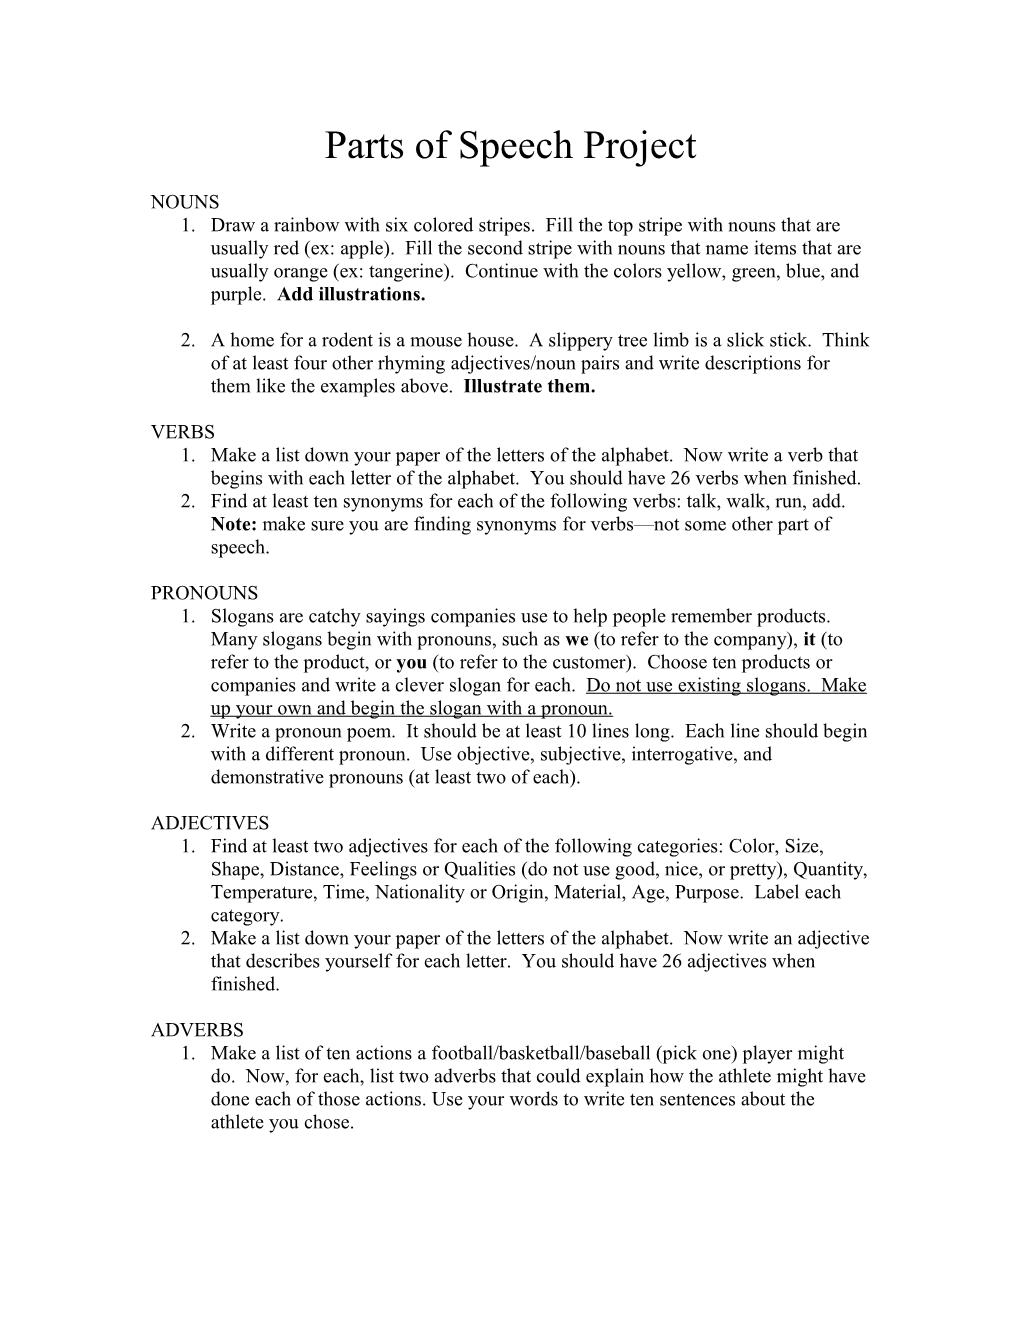 Parts of Speech Project